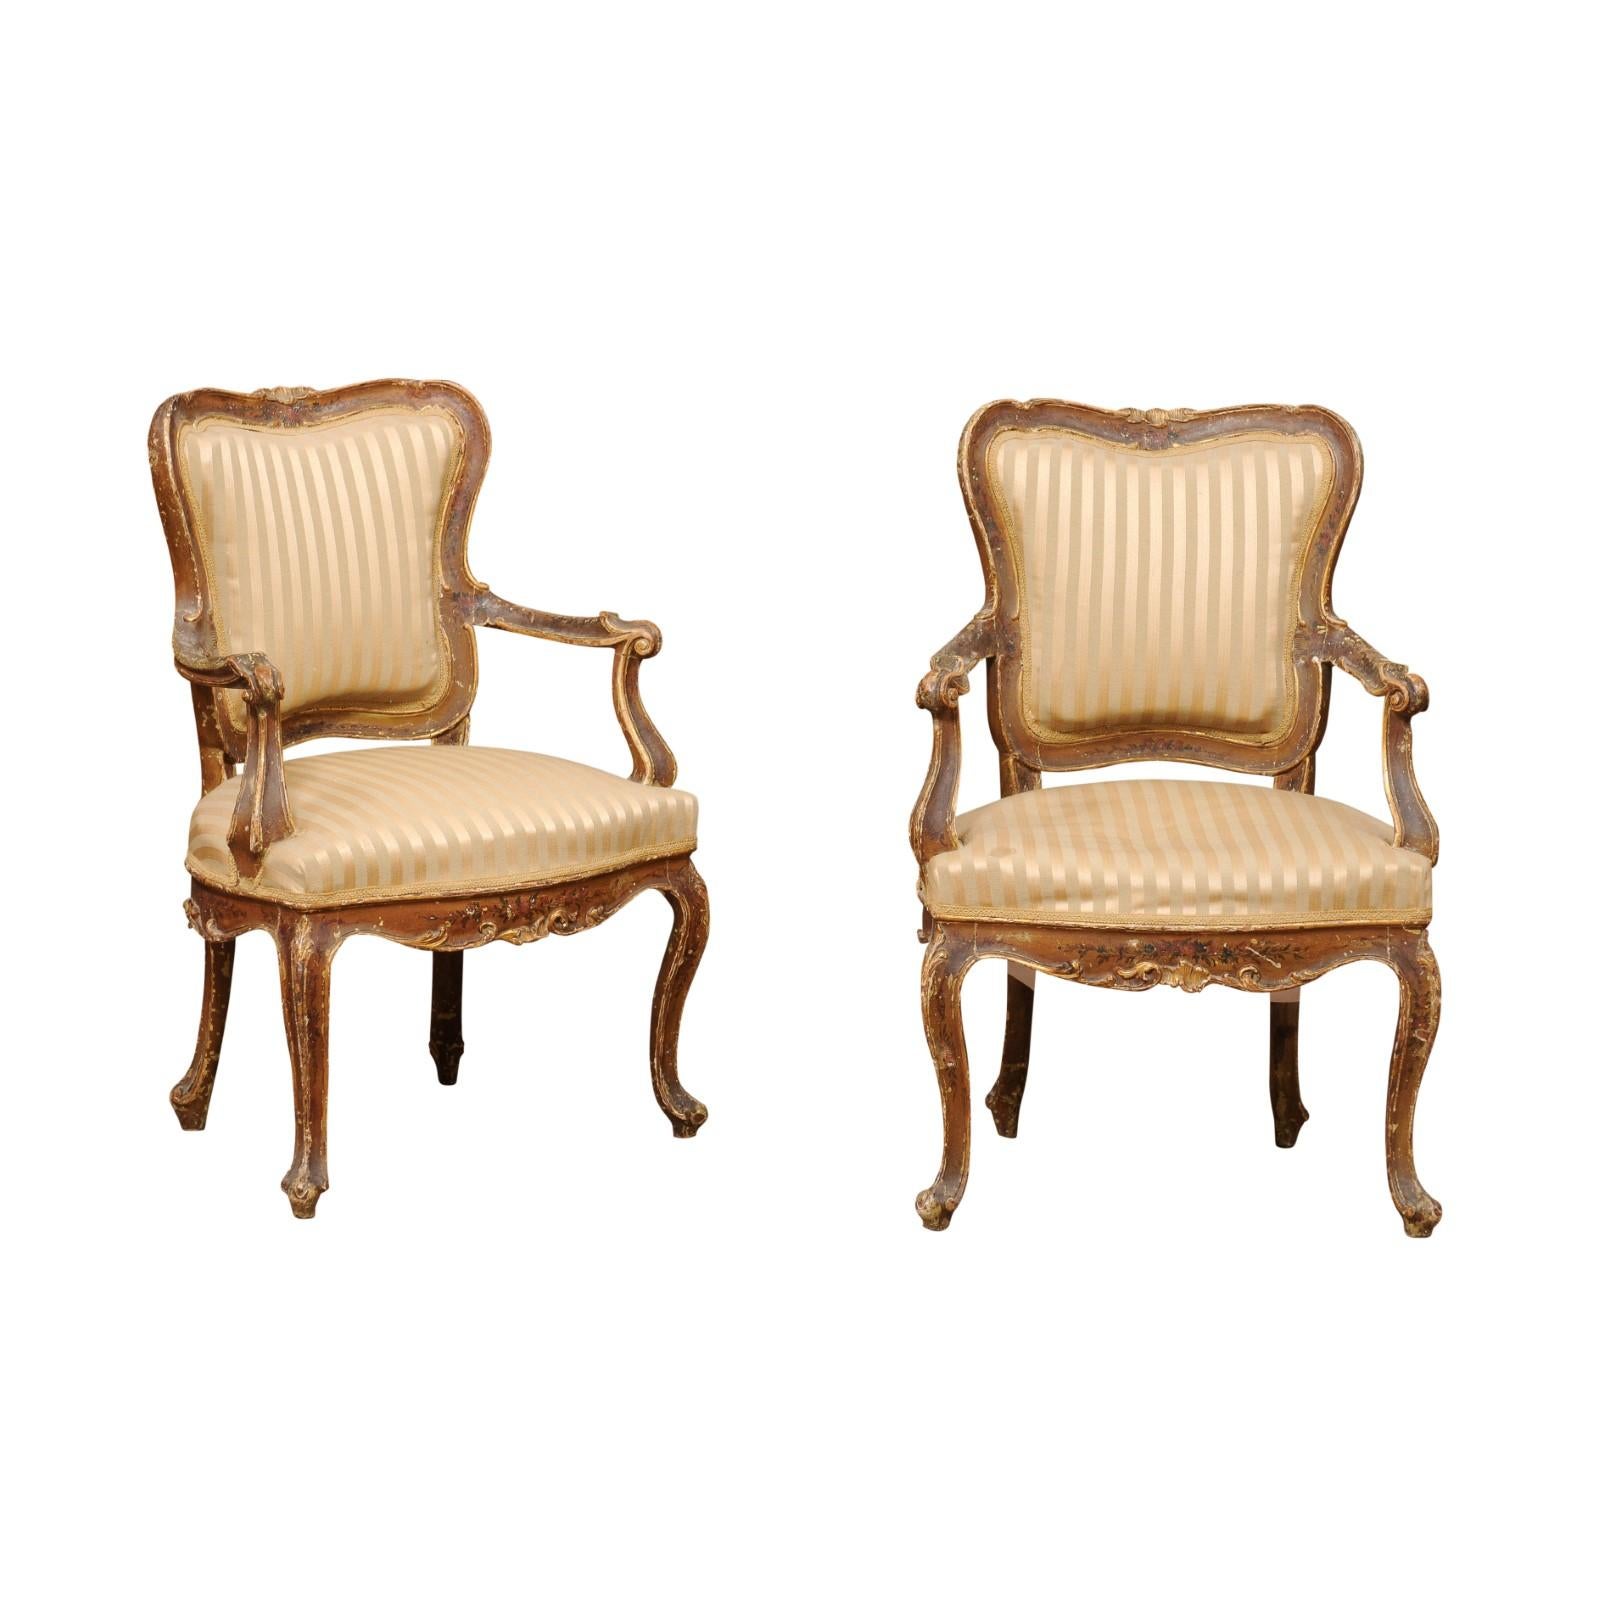 Pair of 19th century Italian Rococo Painted Armchairs.